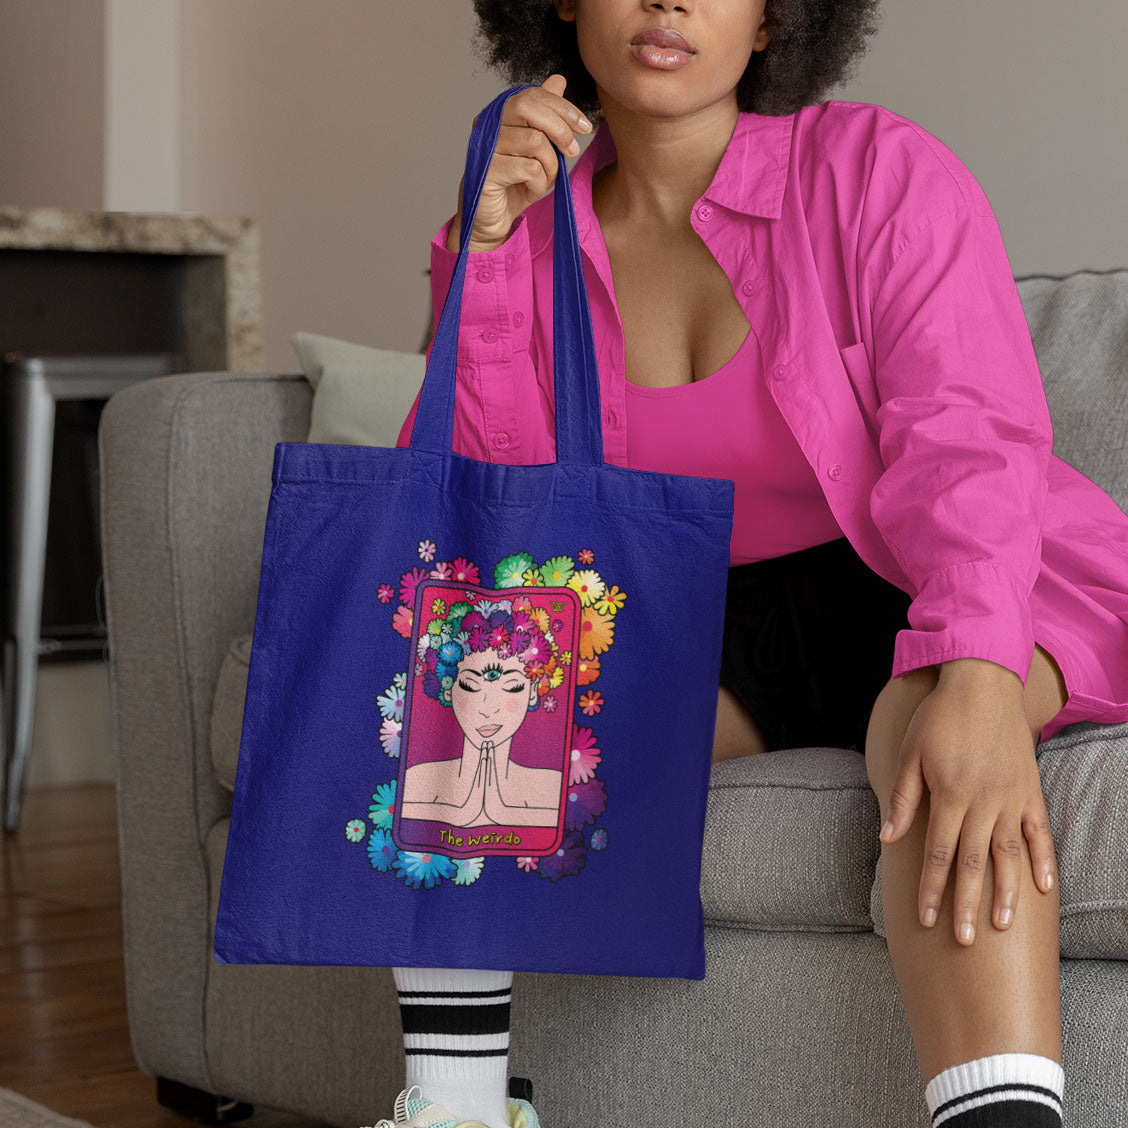 this blue cotton tote bag has "The Weirdo" Tarot card printed at the front of the shopping bag. If you are into tarot cards or spirituality and don't wanna buy plastic bags, this tote bag is a must have for you!